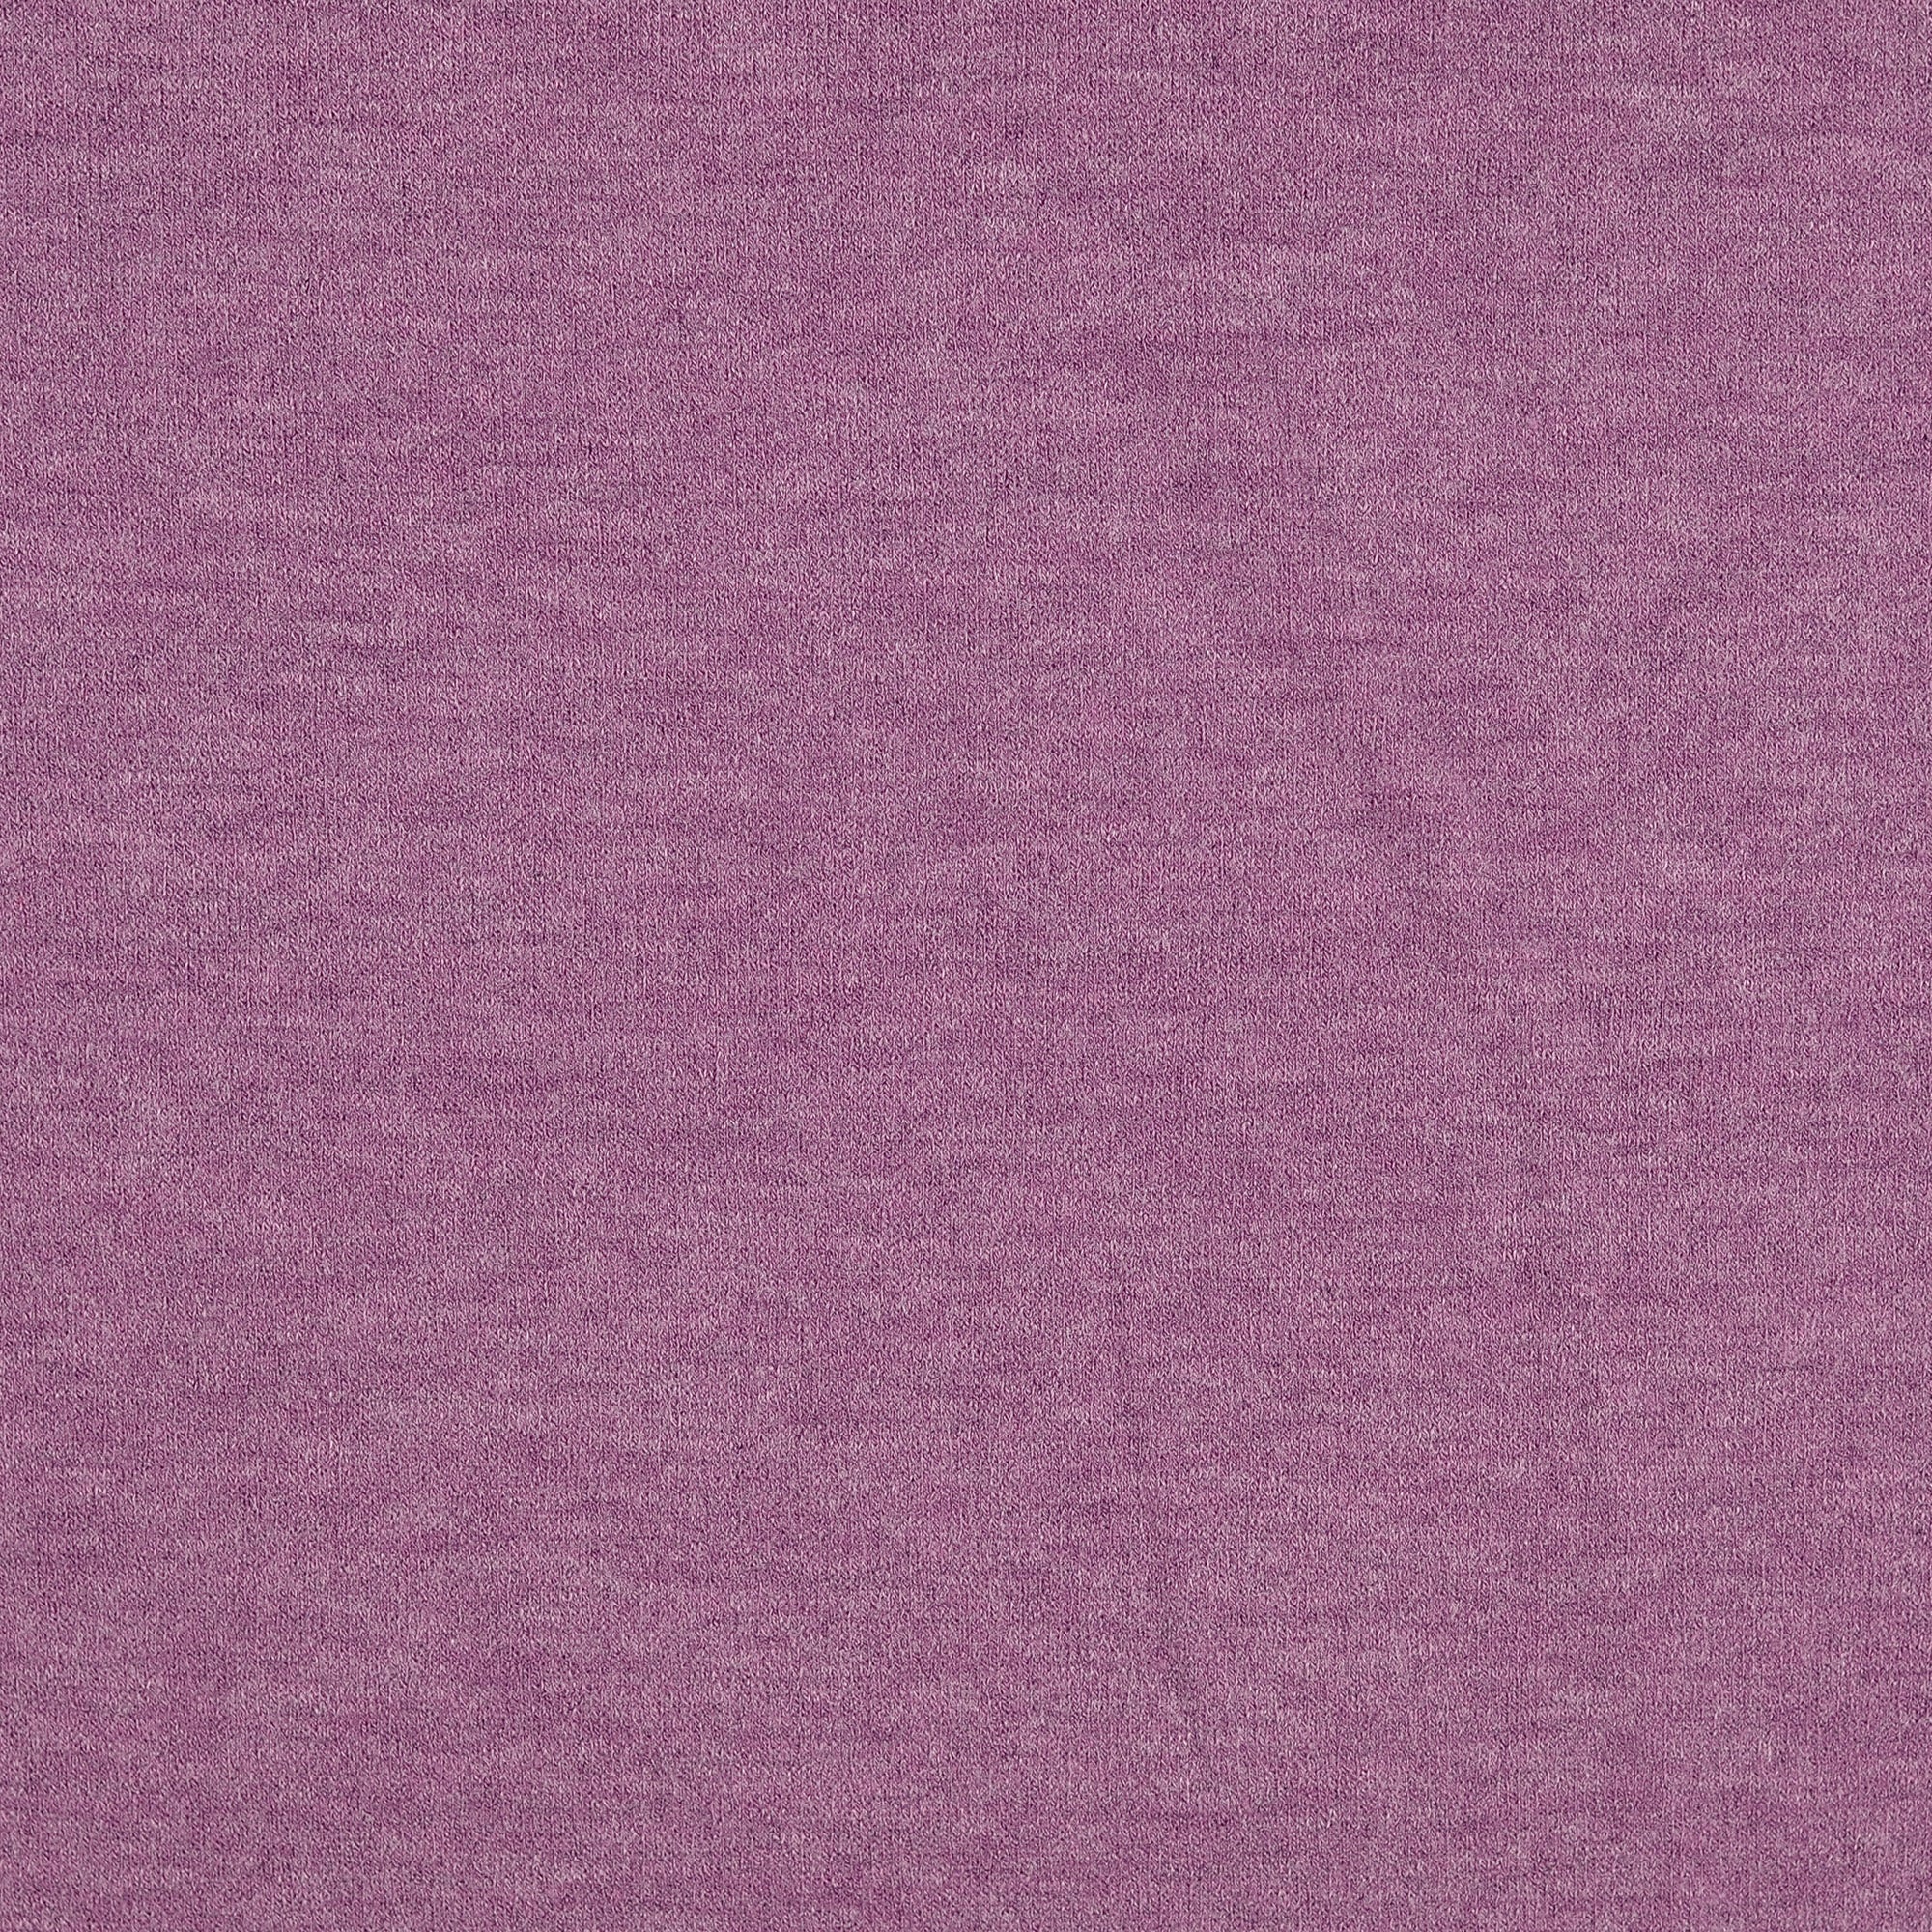 REMNANT 2.3 Metres - Comfy Viscose Blend Sweater Knit in Lilac